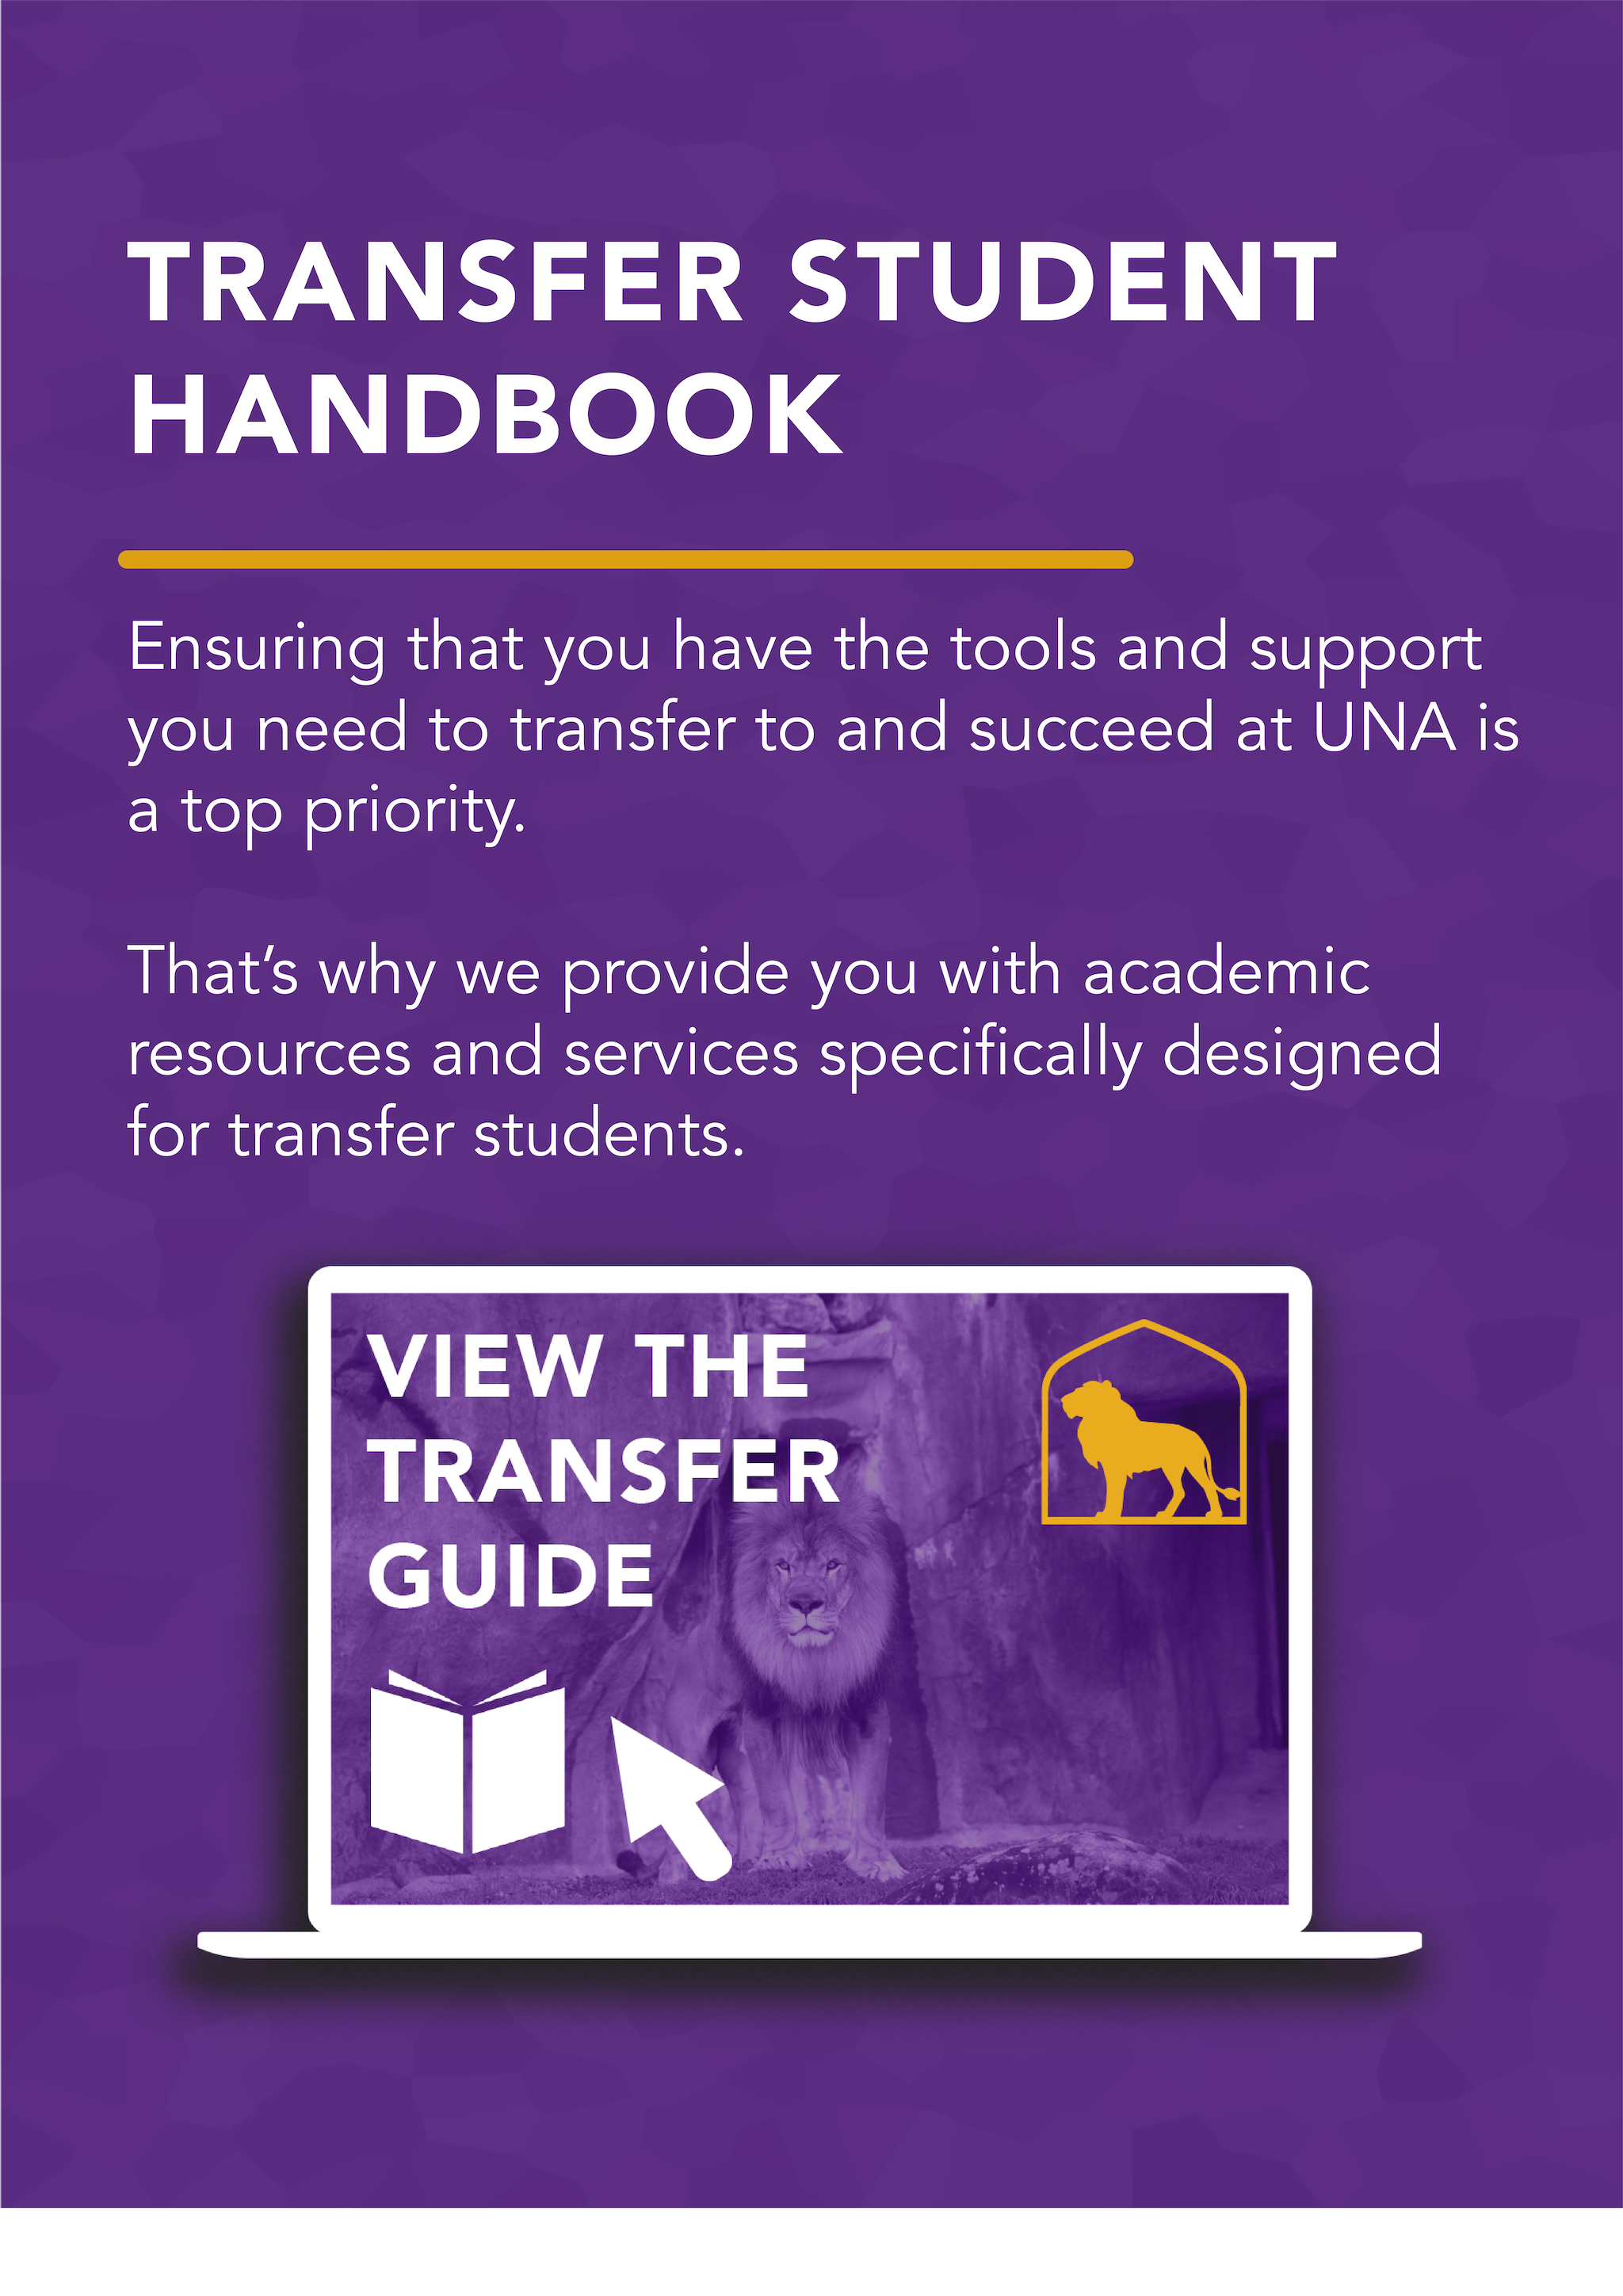 Ensuring that you have the tools and support you need to transfer to and succeed at UNA is a top priority. That's why we provide you with academic resources and services specifically designed for transfer students. Click to view the transfer guide PDF.